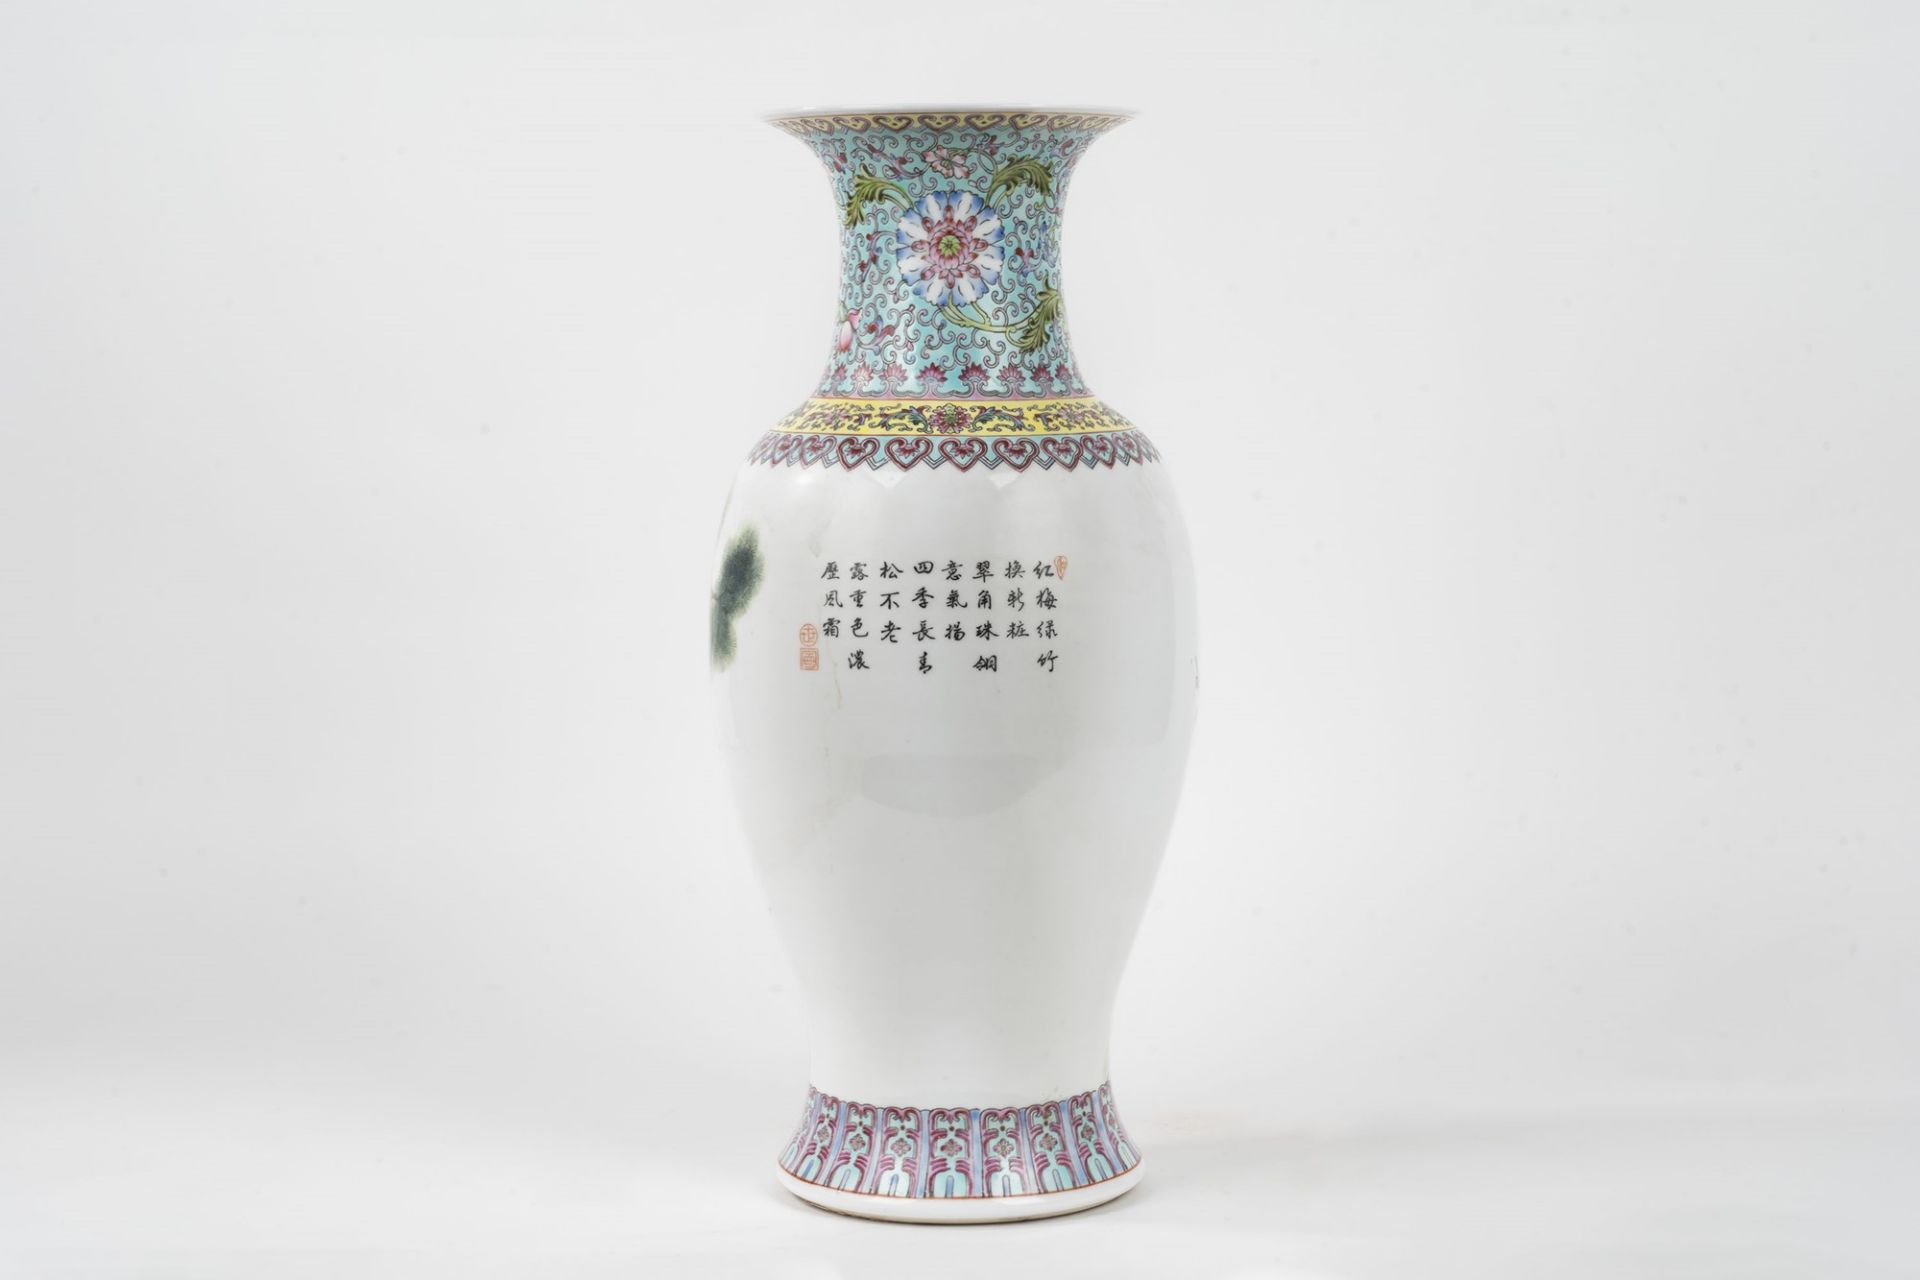 Polychrome porcelain vase with two peacocks on the body, China, 20th century - Bild 2 aus 3